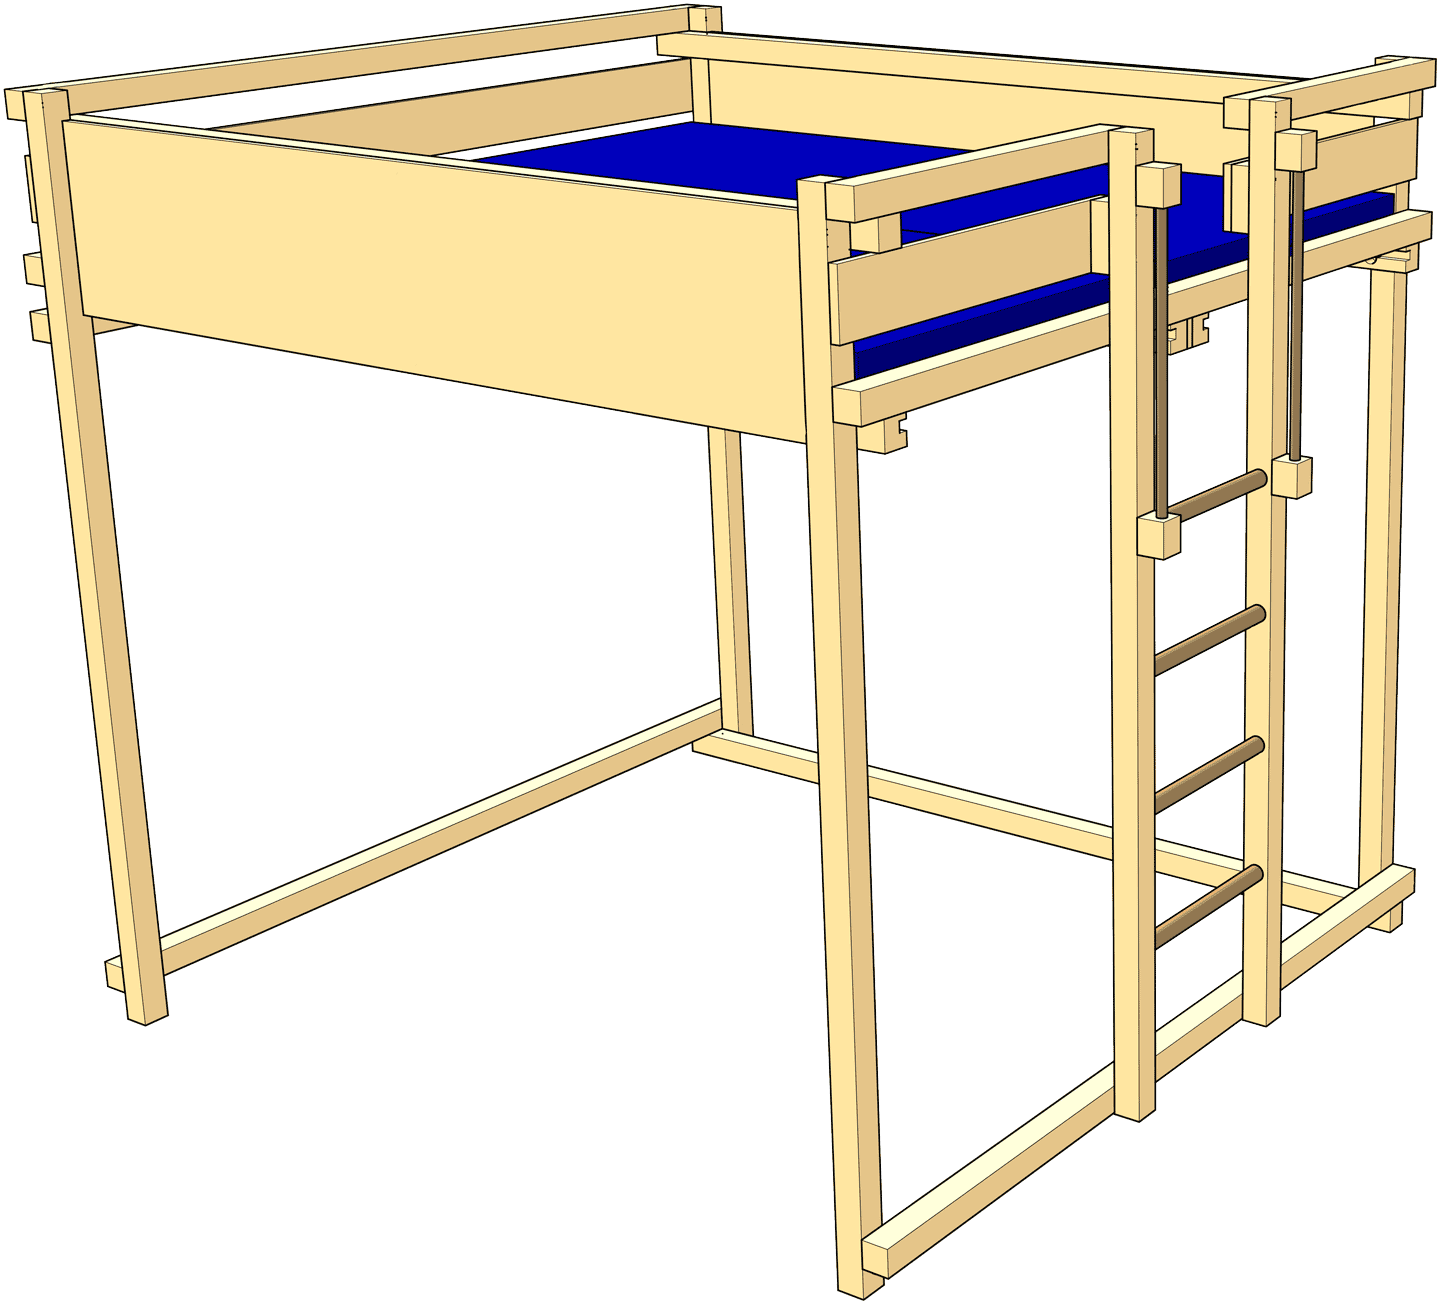 Double loft bed: loft bed with extra-wide sleeping level (Kids’ Beds)